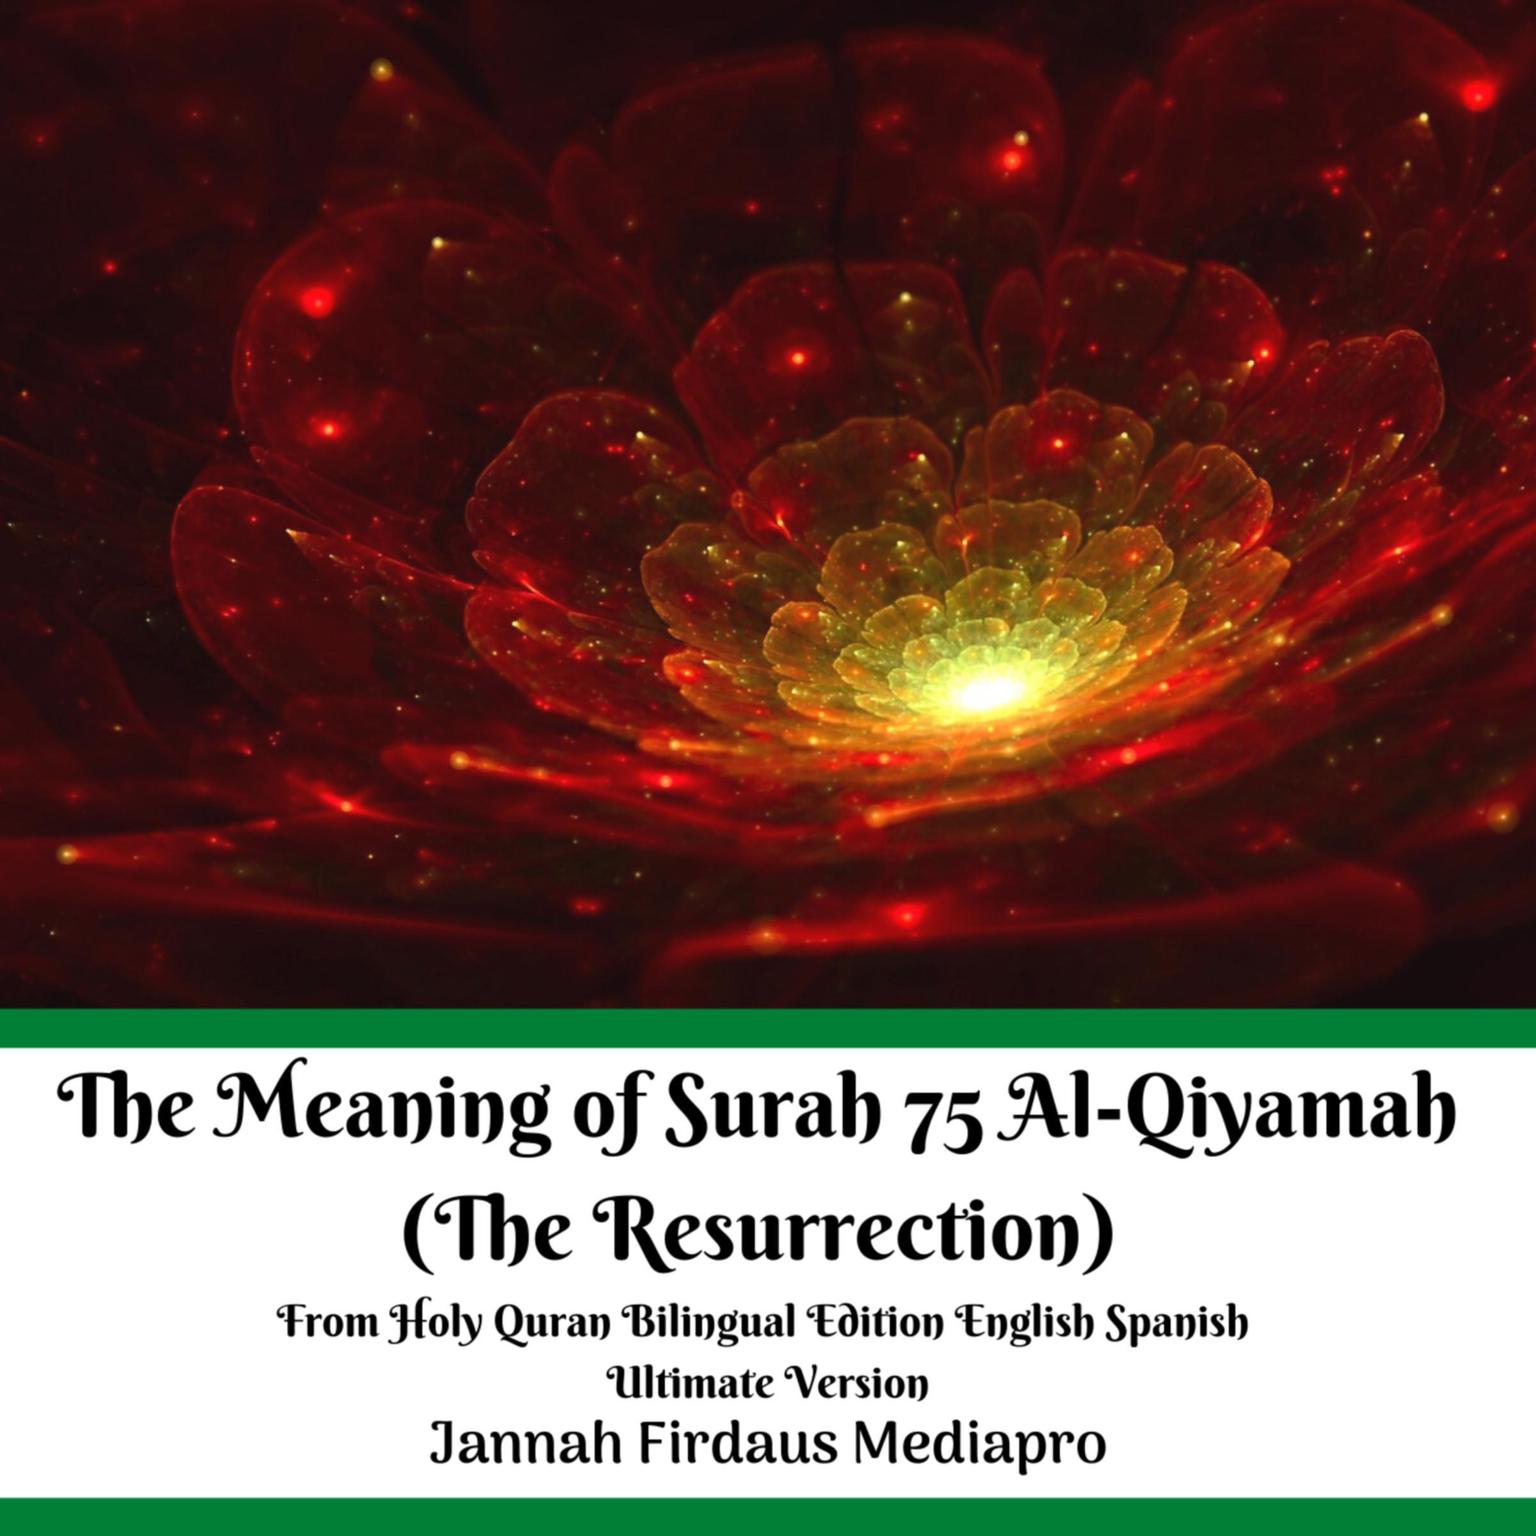 The Meaning of Surah 75 Al-Qiyamah (The Resurrection): From Holy Quran Bilingual Edition English Spanish Ultimate Version Audiobook, by Jannah Firdaus Mediapro